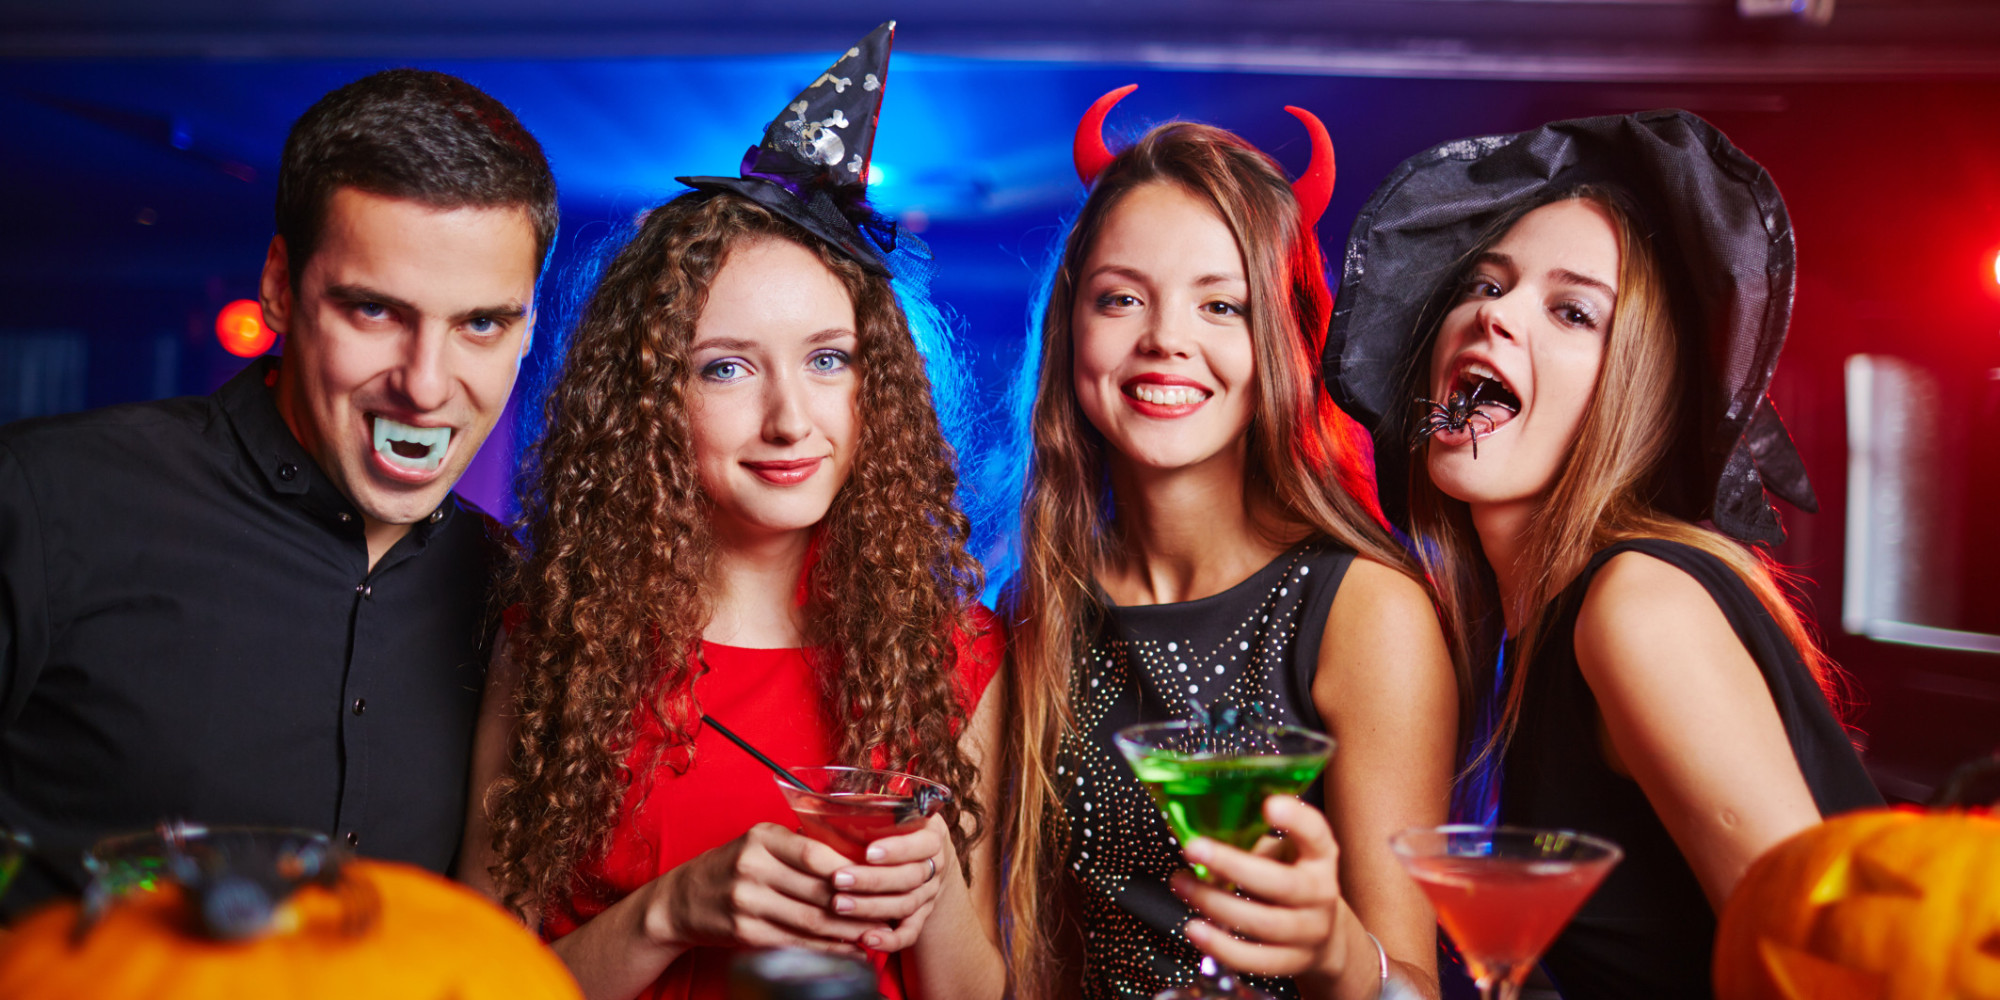 How to Have Fun While Staying Safe at a College Halloween Party ...